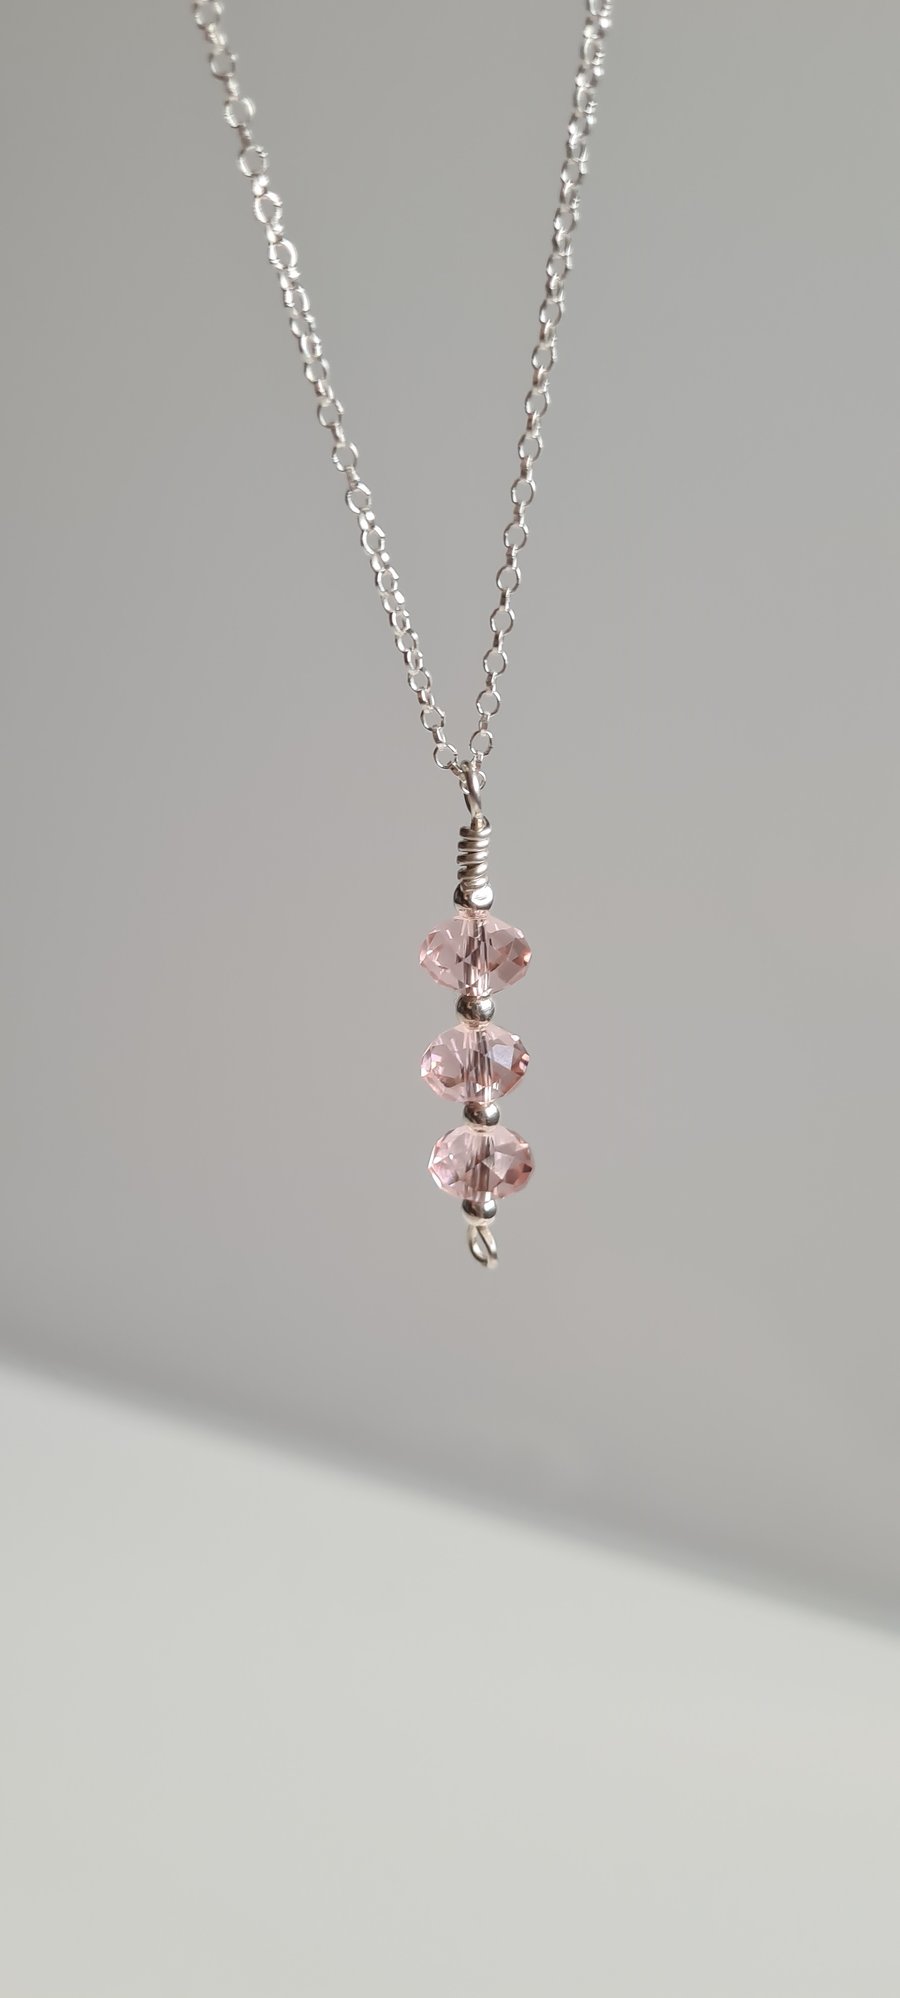 Handmade 925 Silver and Pink Crystal Glass Pendant Necklace on 925 Silver Chain 